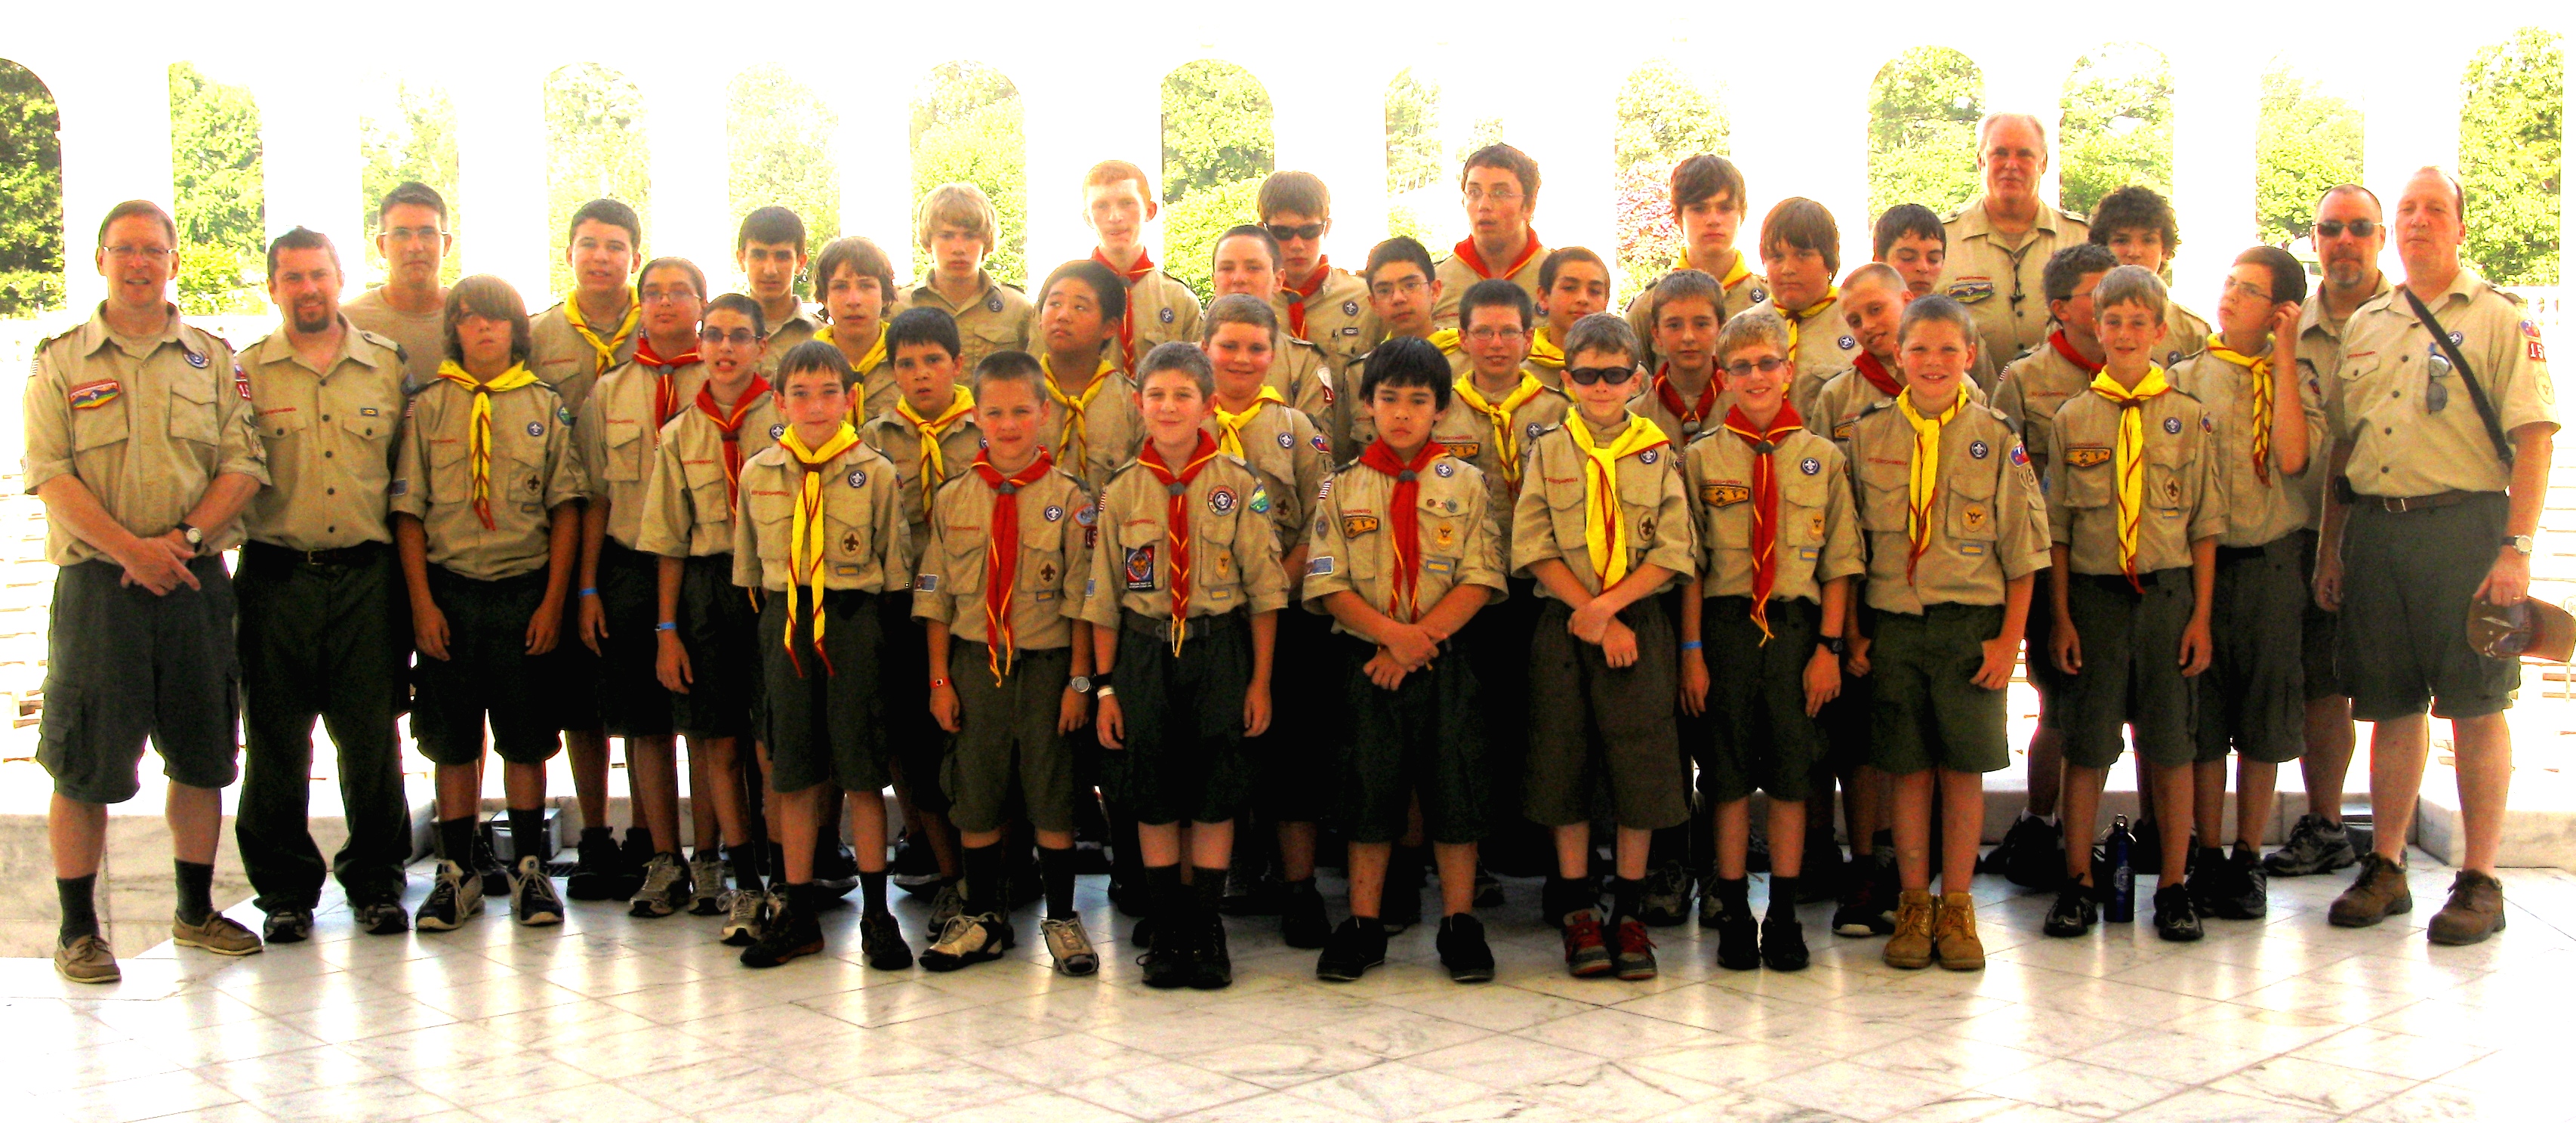 2011 Camp Picture